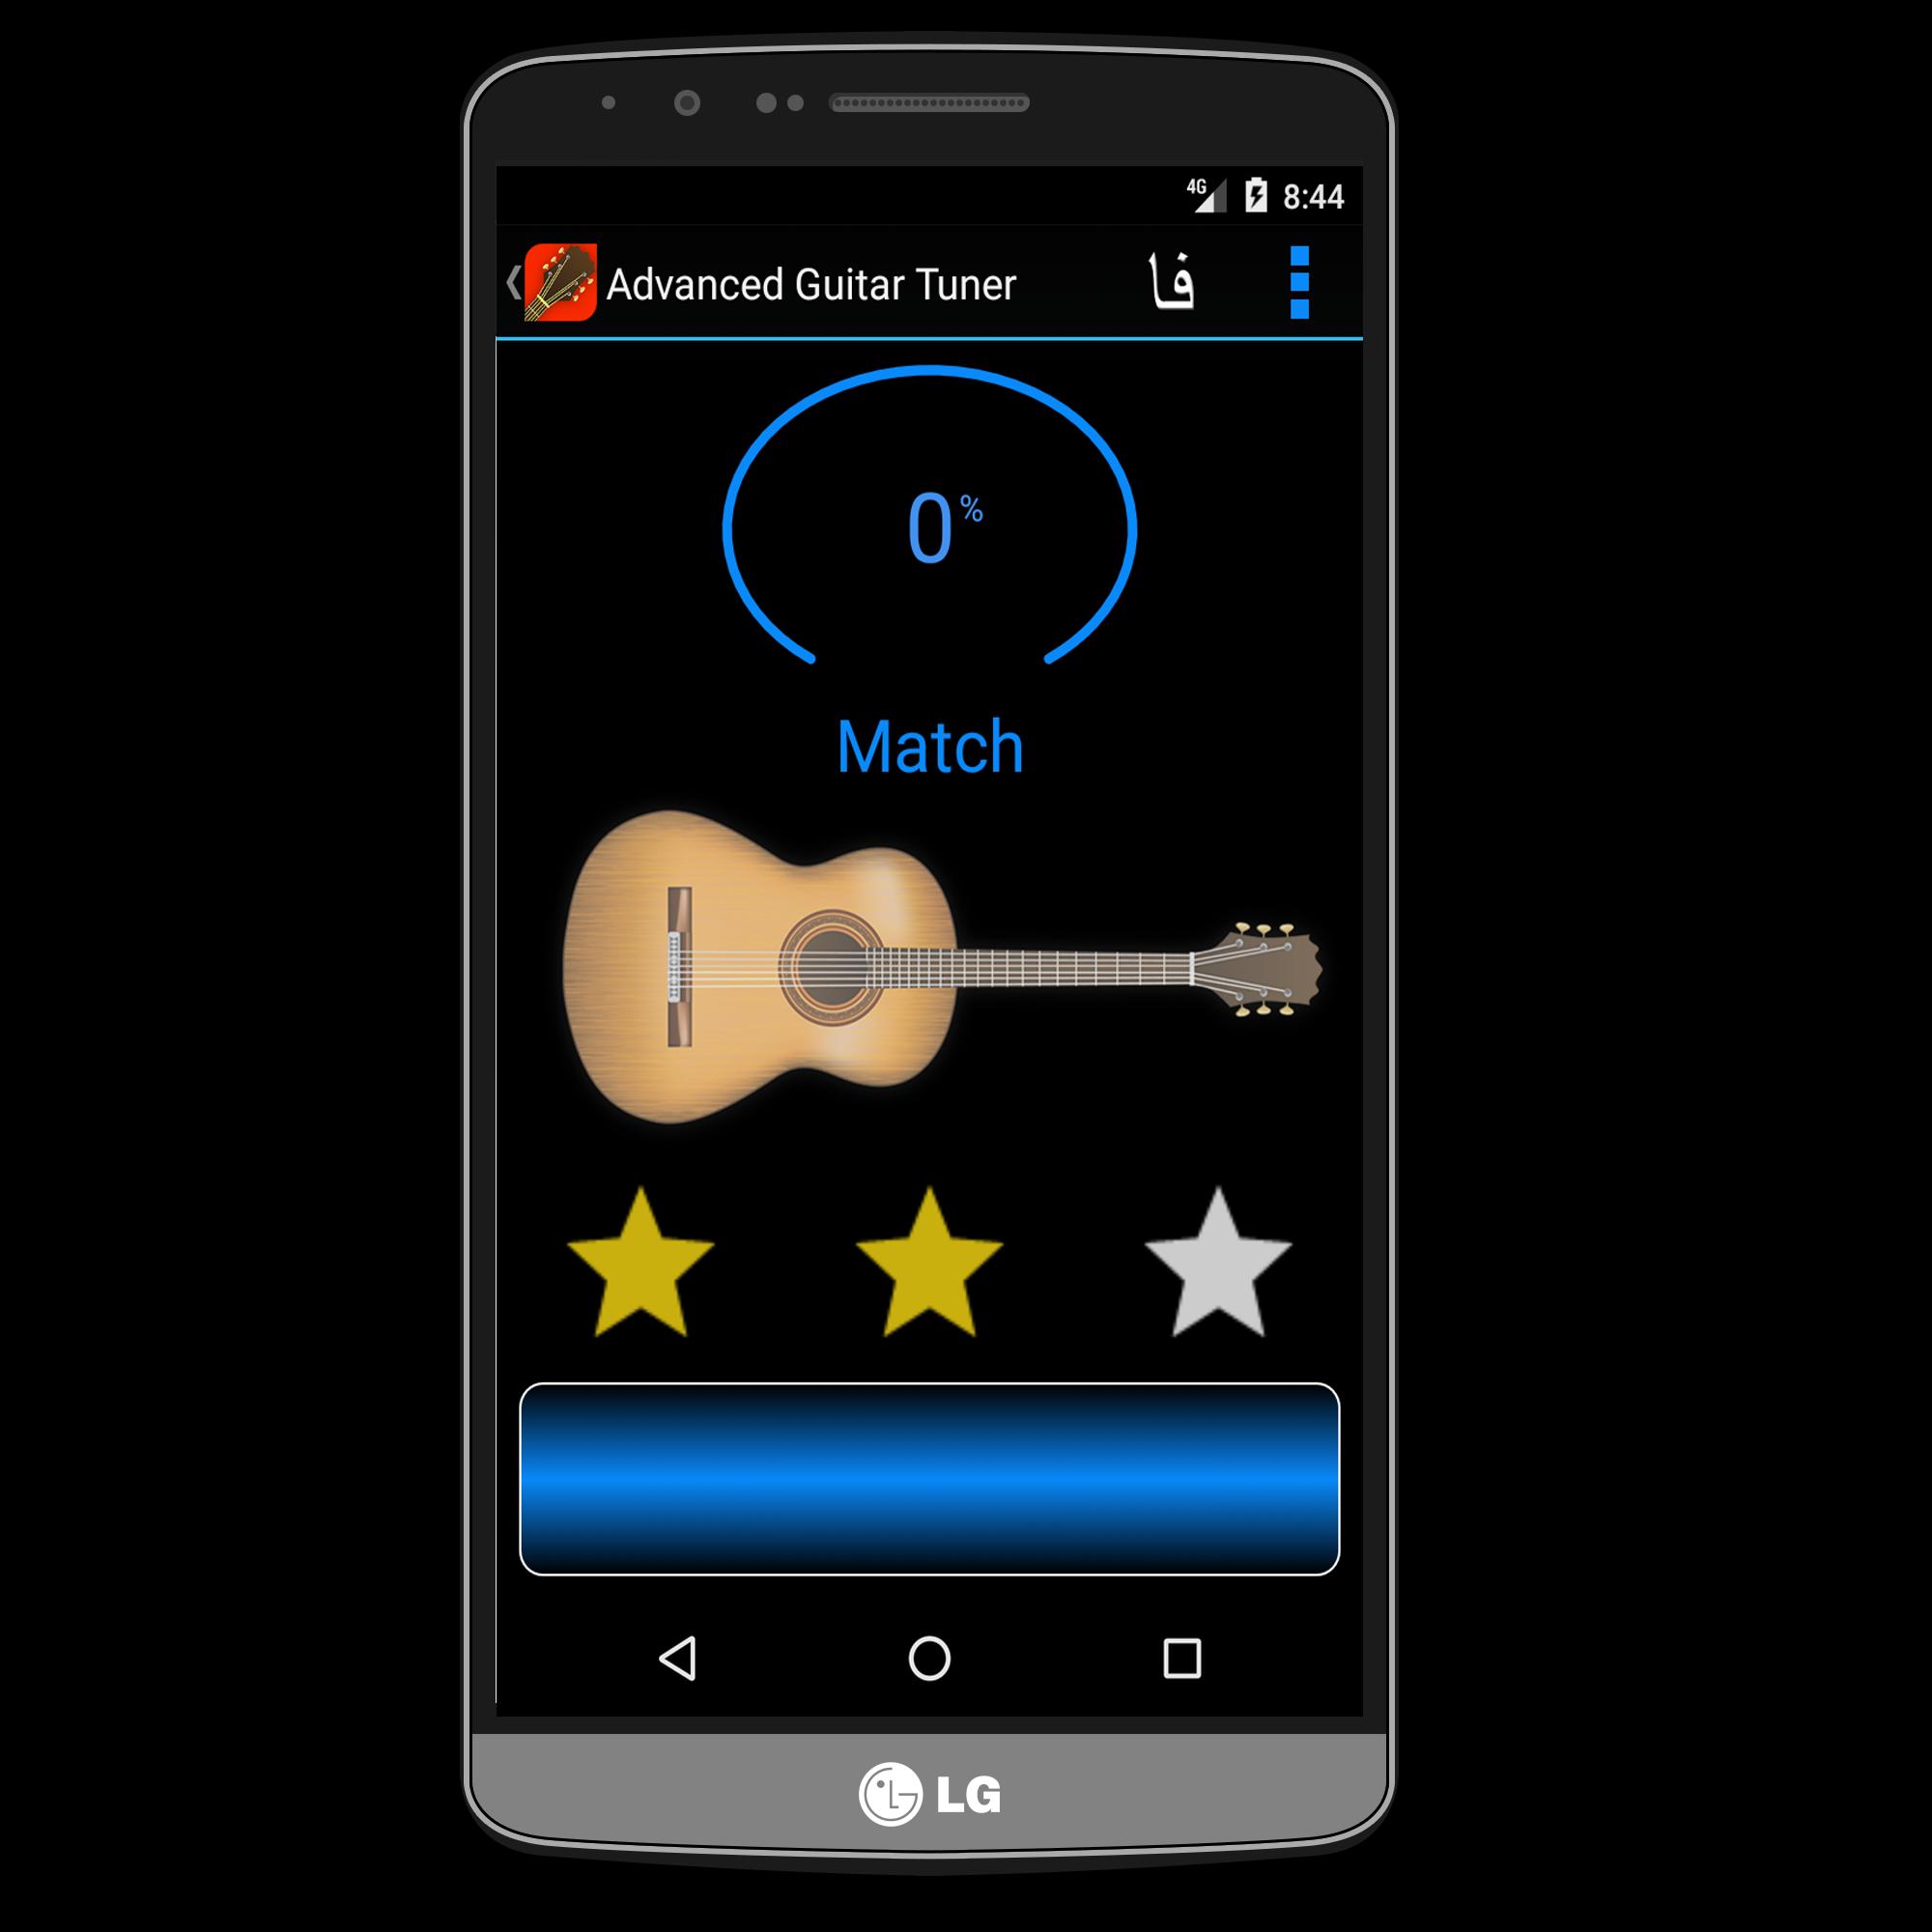 Advanced Guitar Tuner for Android - APK Download